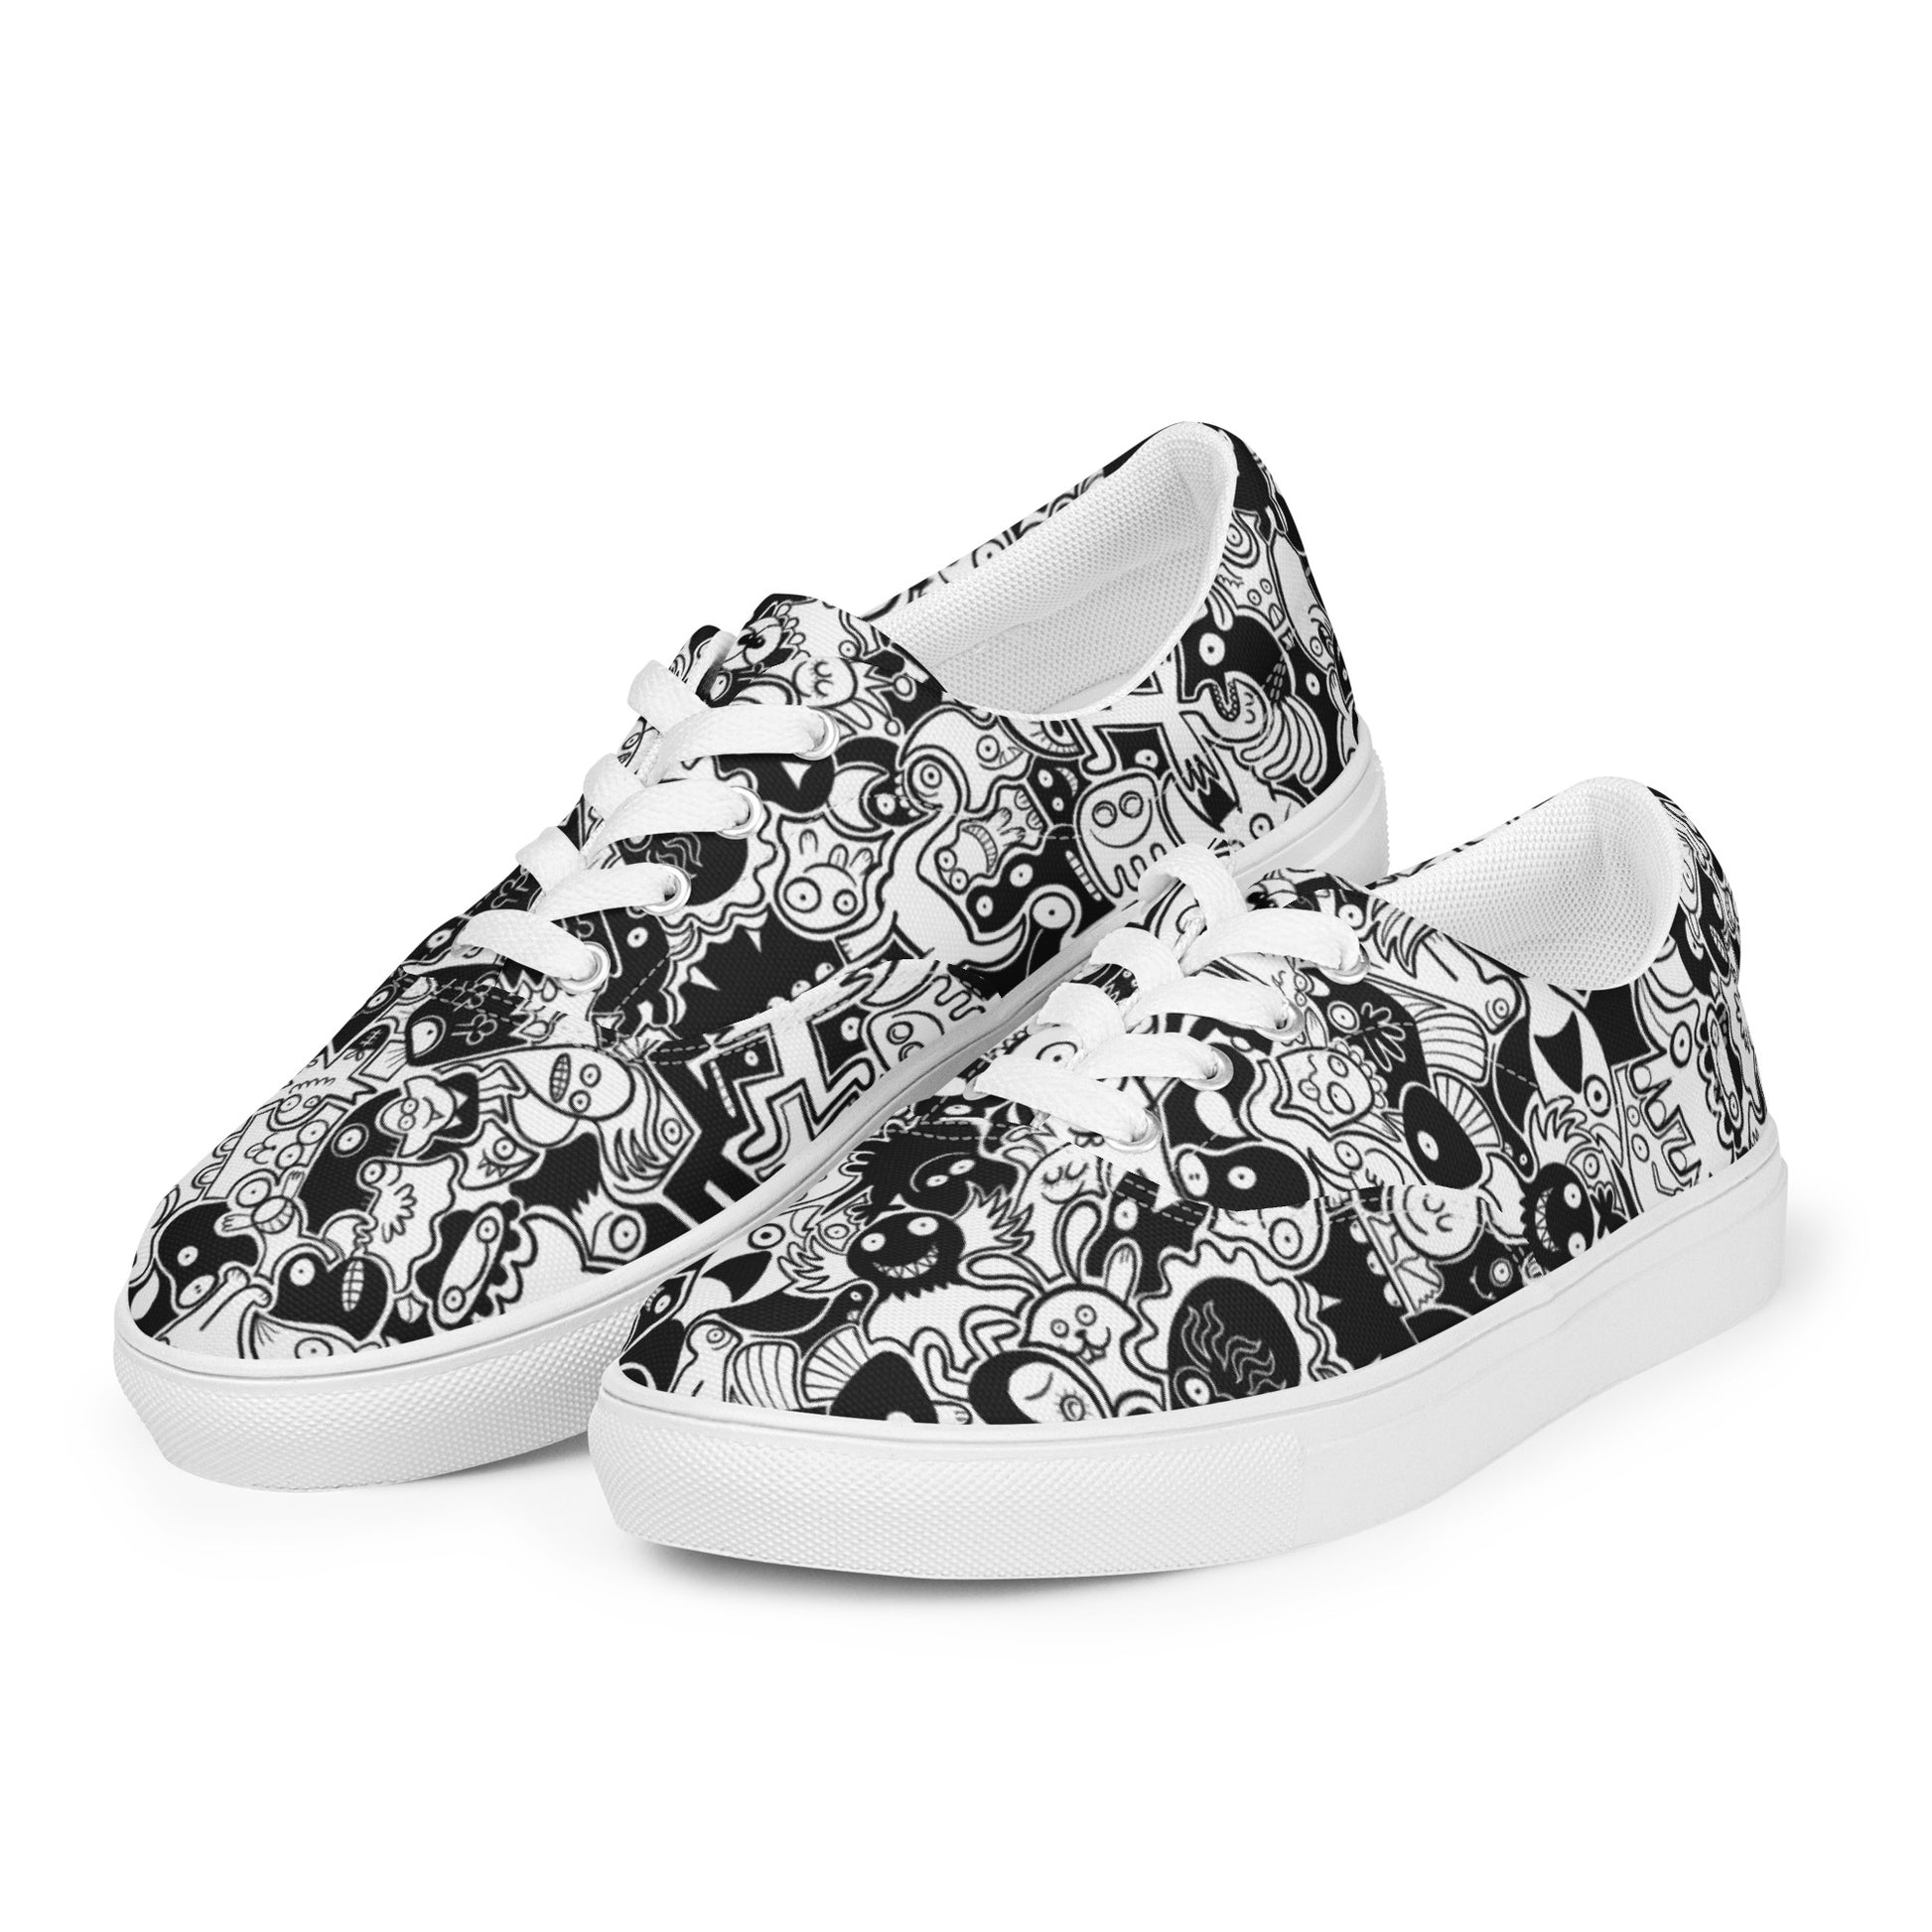 Joyful crowd of black and white doodle creatures Women’s lace-up canvas shoes. Playing with shoes